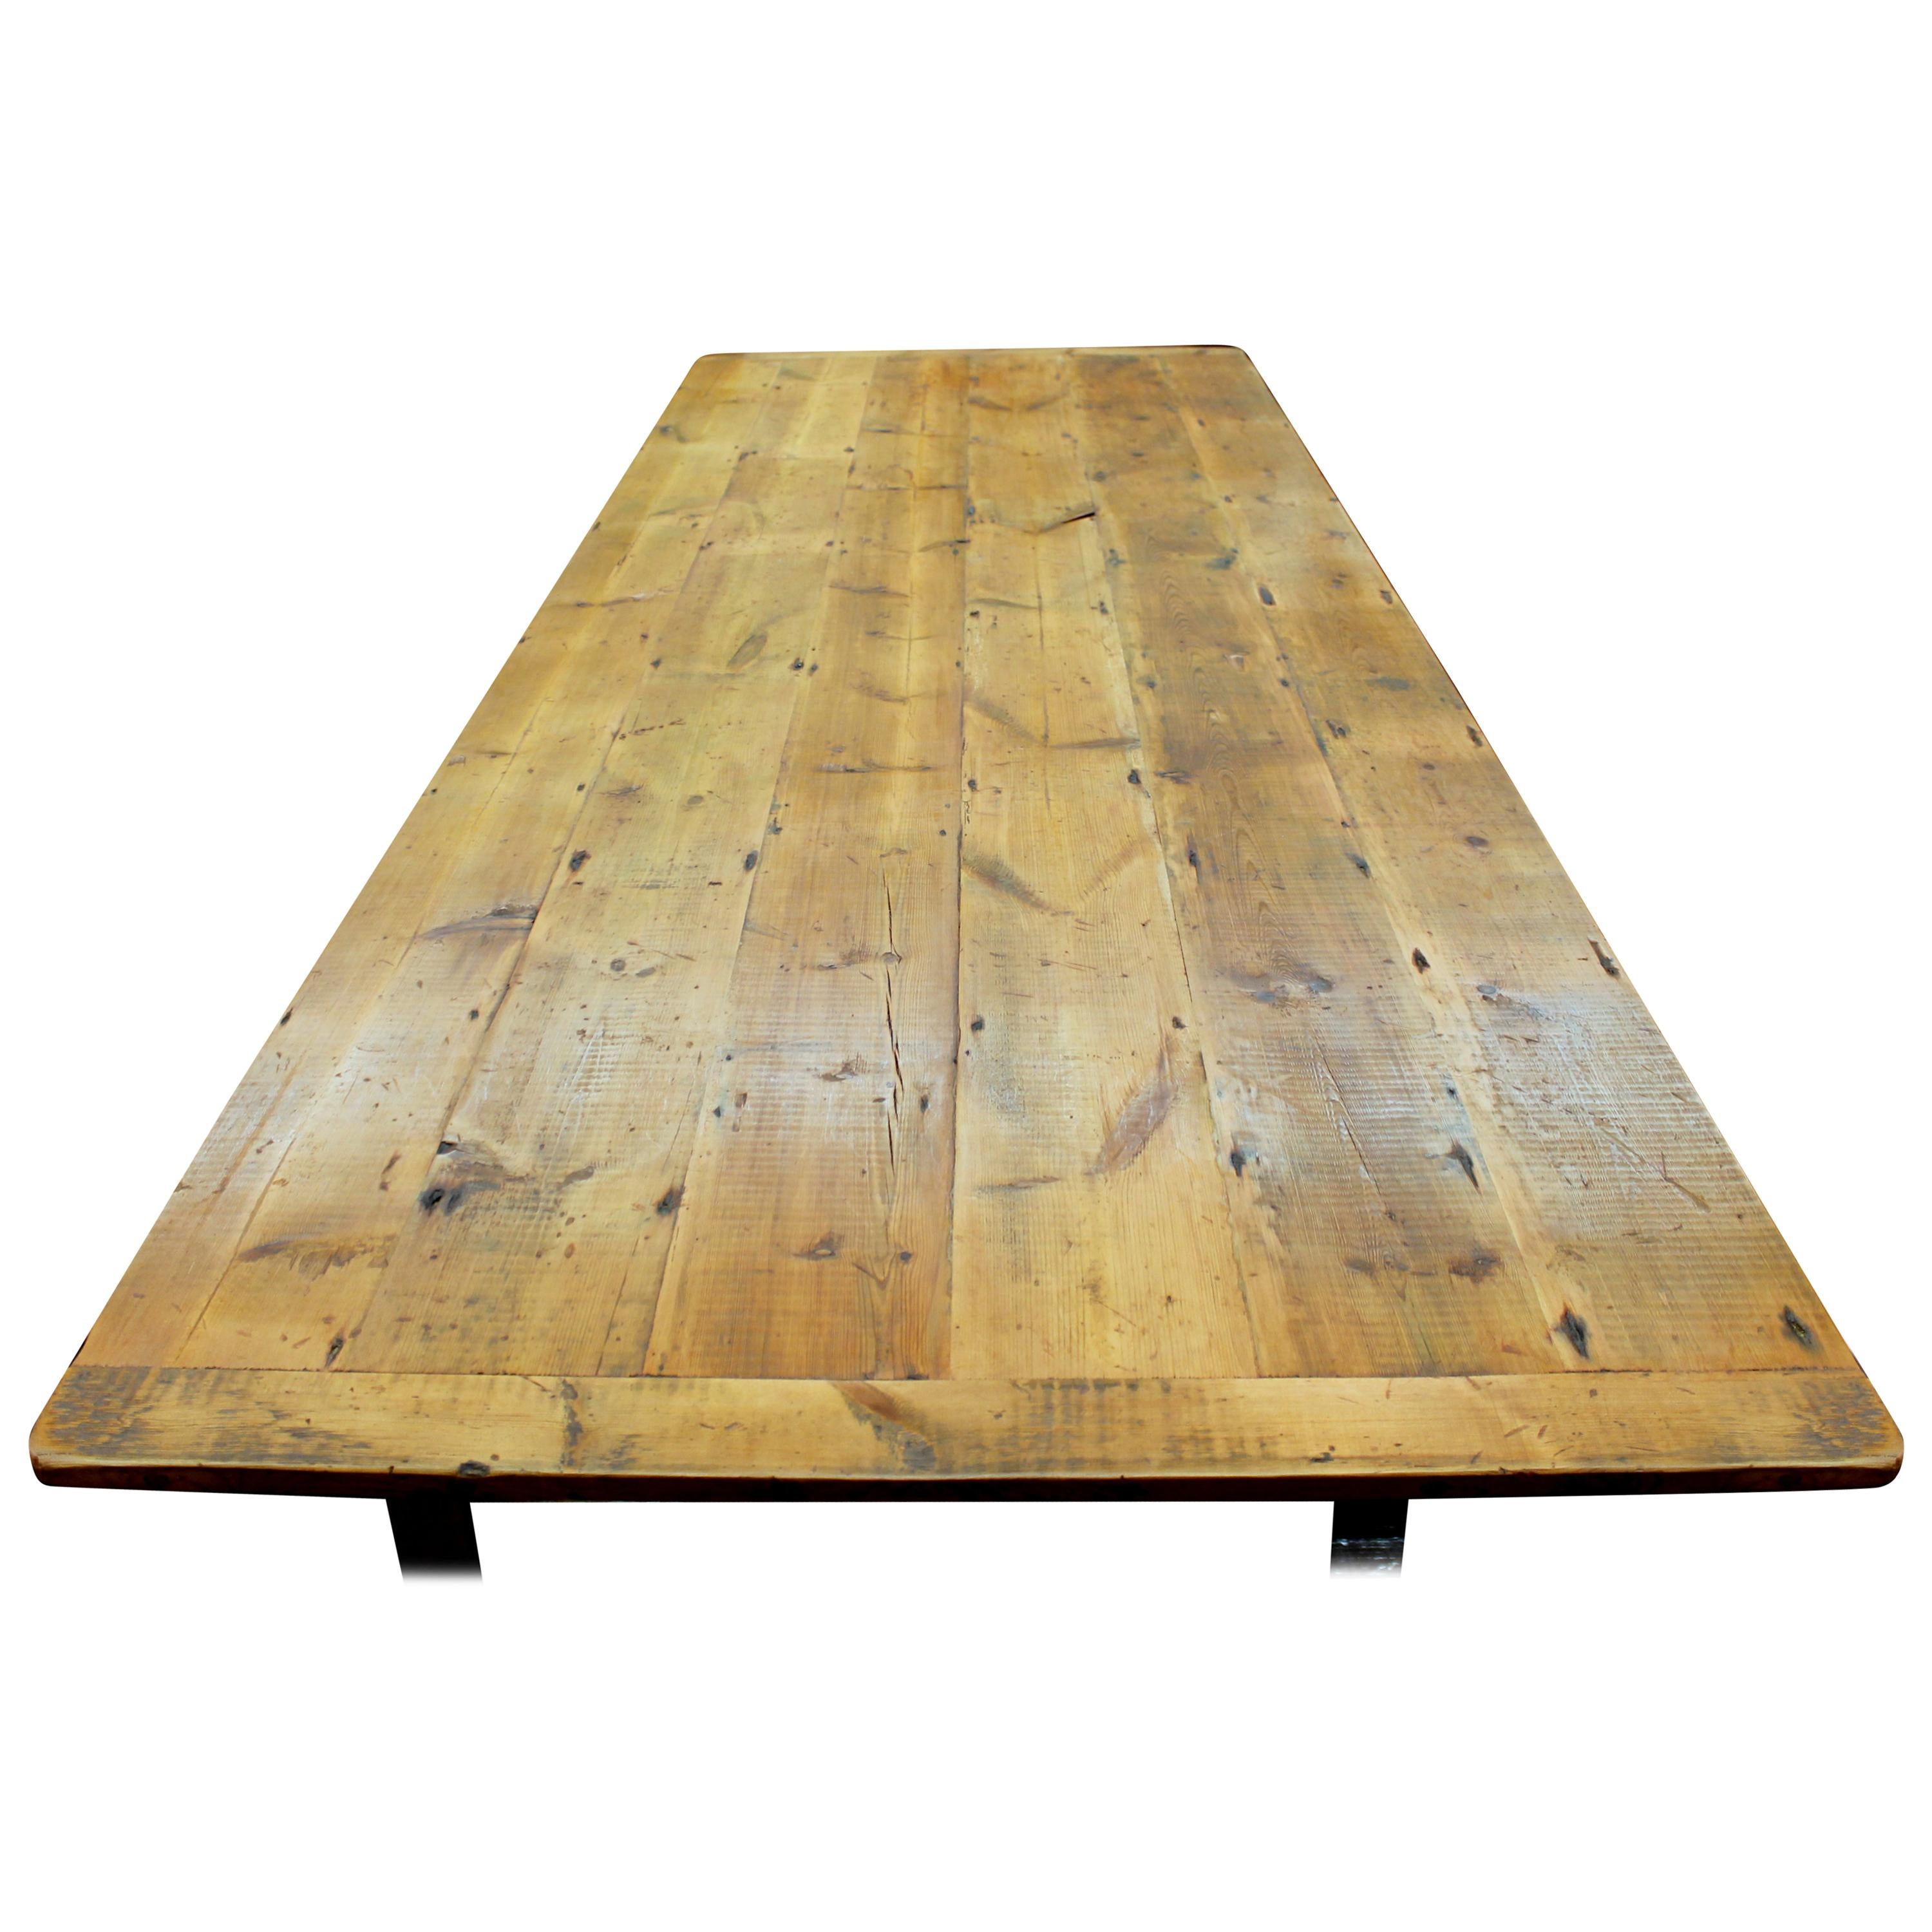 Antique English Knotty Pine Farm House Table with "Bread-Board" Ends